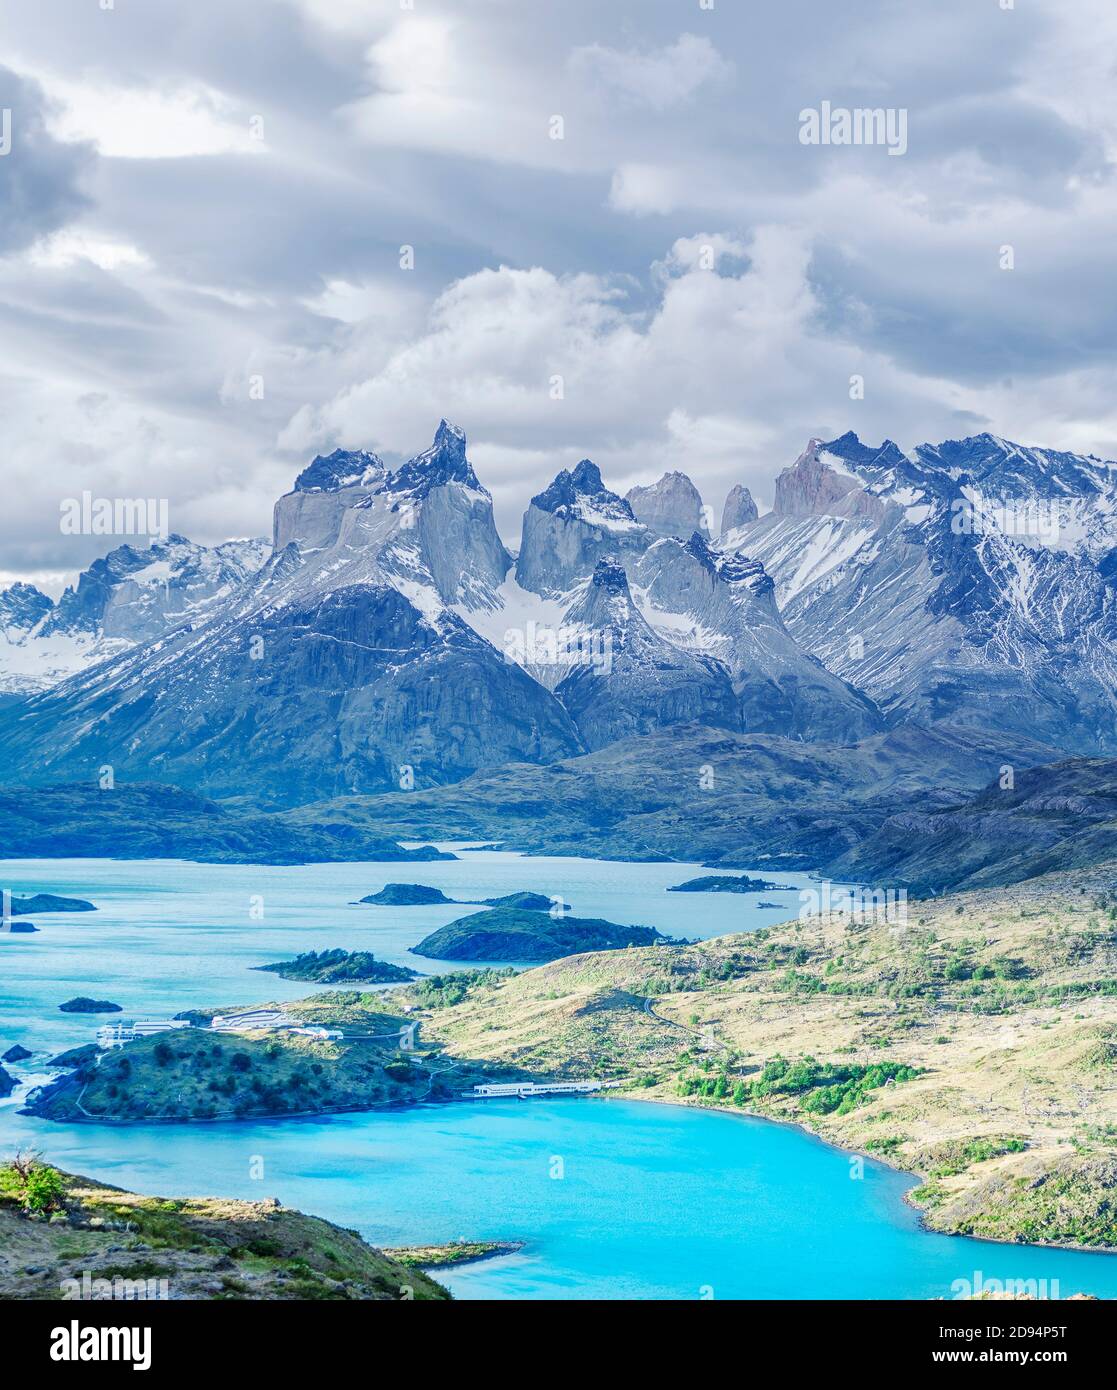 View of Horns of Paine mountains and Lake Pehoe, Torres del Paine National Park, Chile, South America Stock Photo